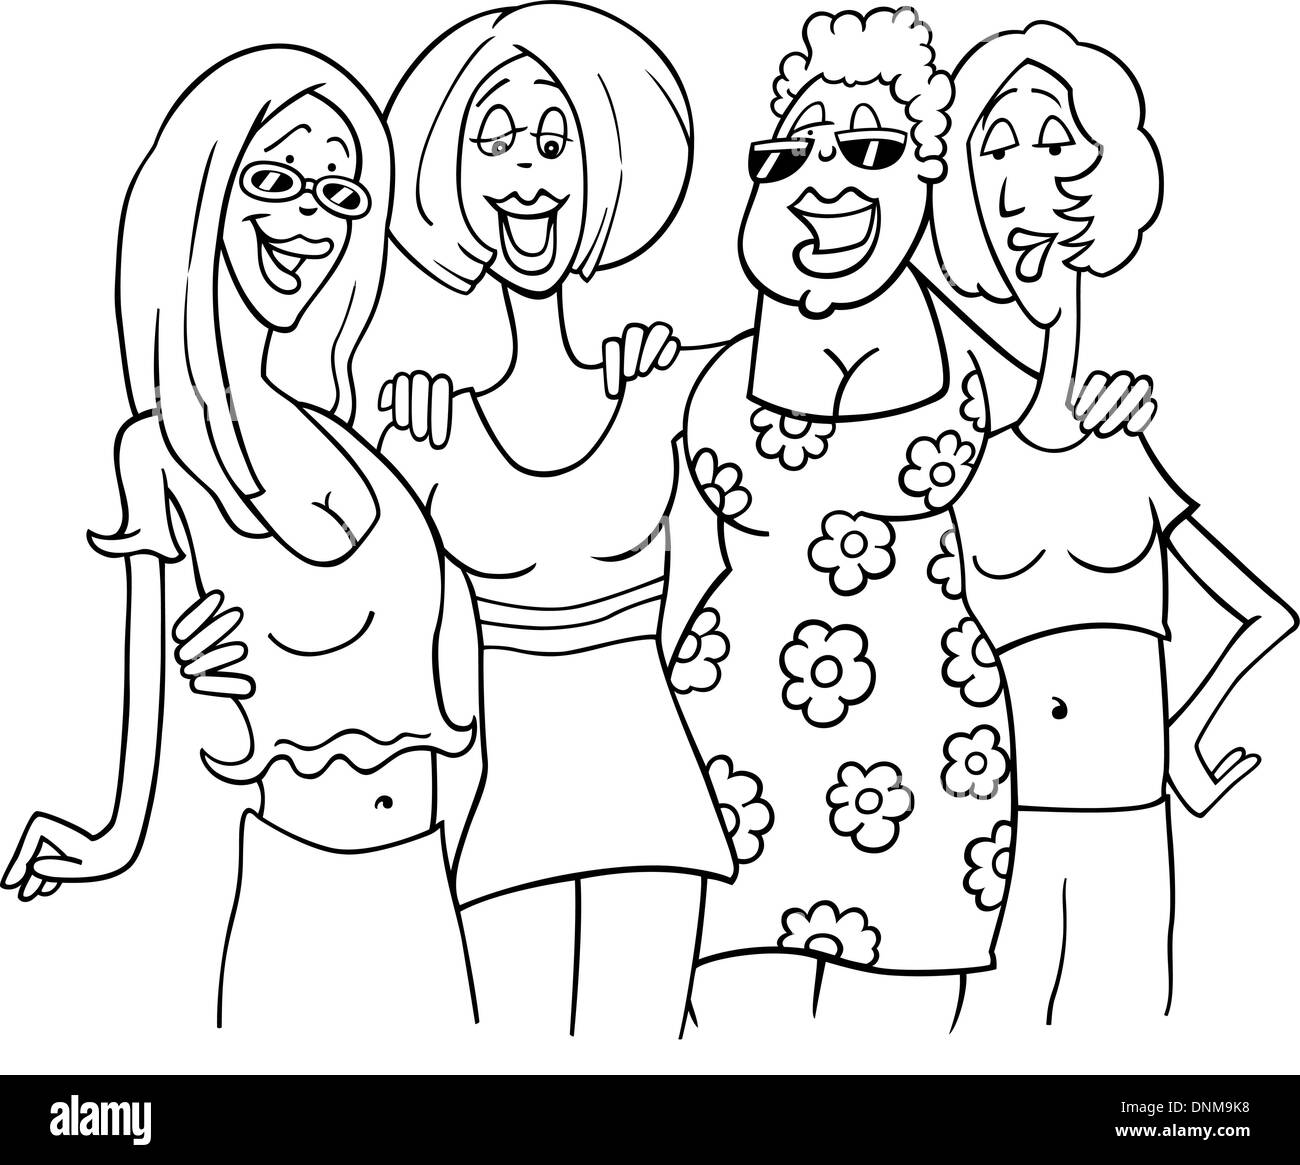 Black and White Cartoon Illustration of Four Women Friends Meeting Stock Vector